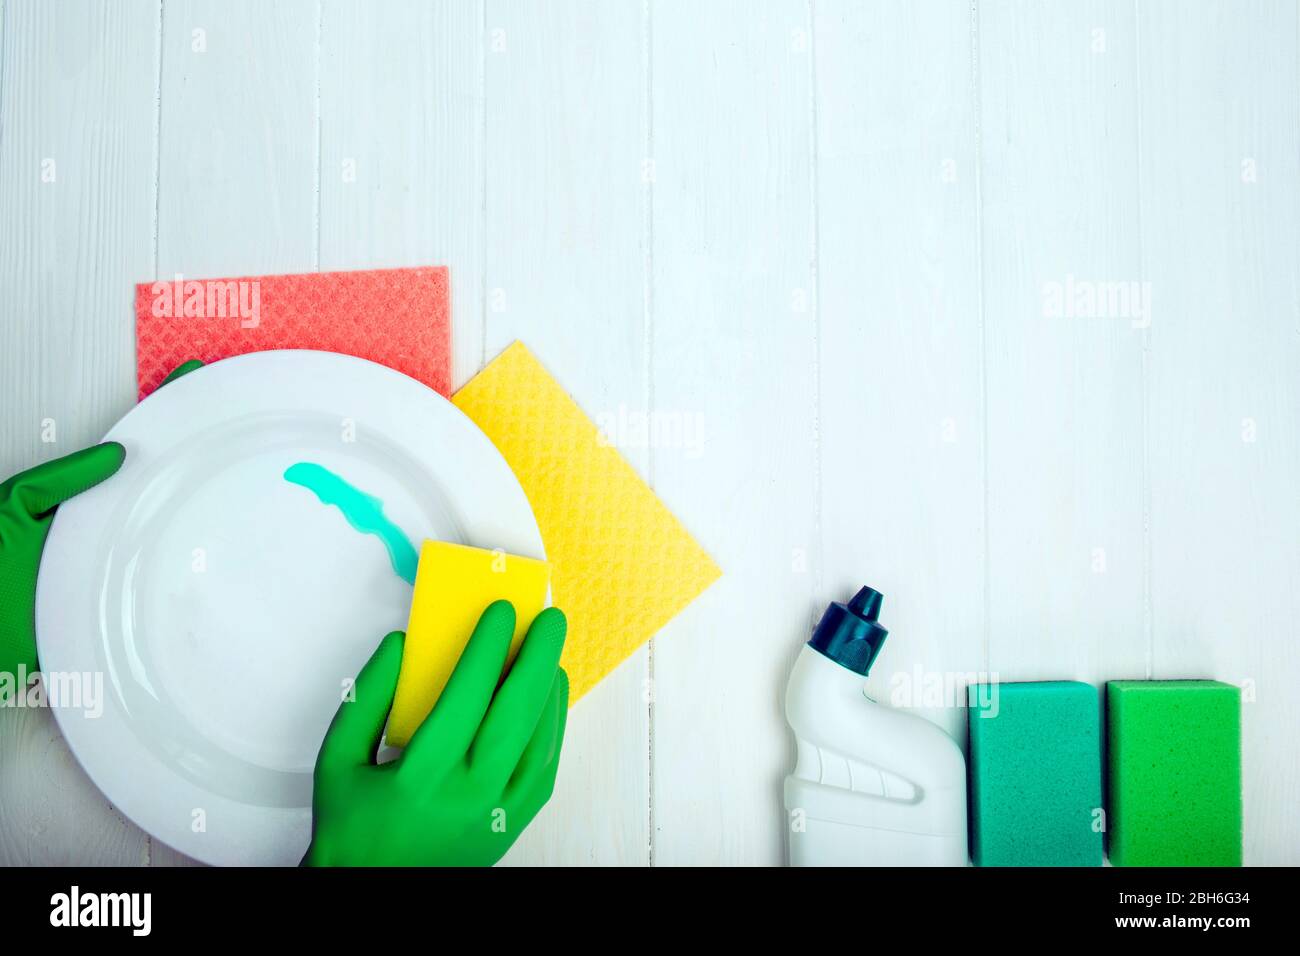 hands in rubber gloves washing dishes and cleaning detergent, top view Stock Photo